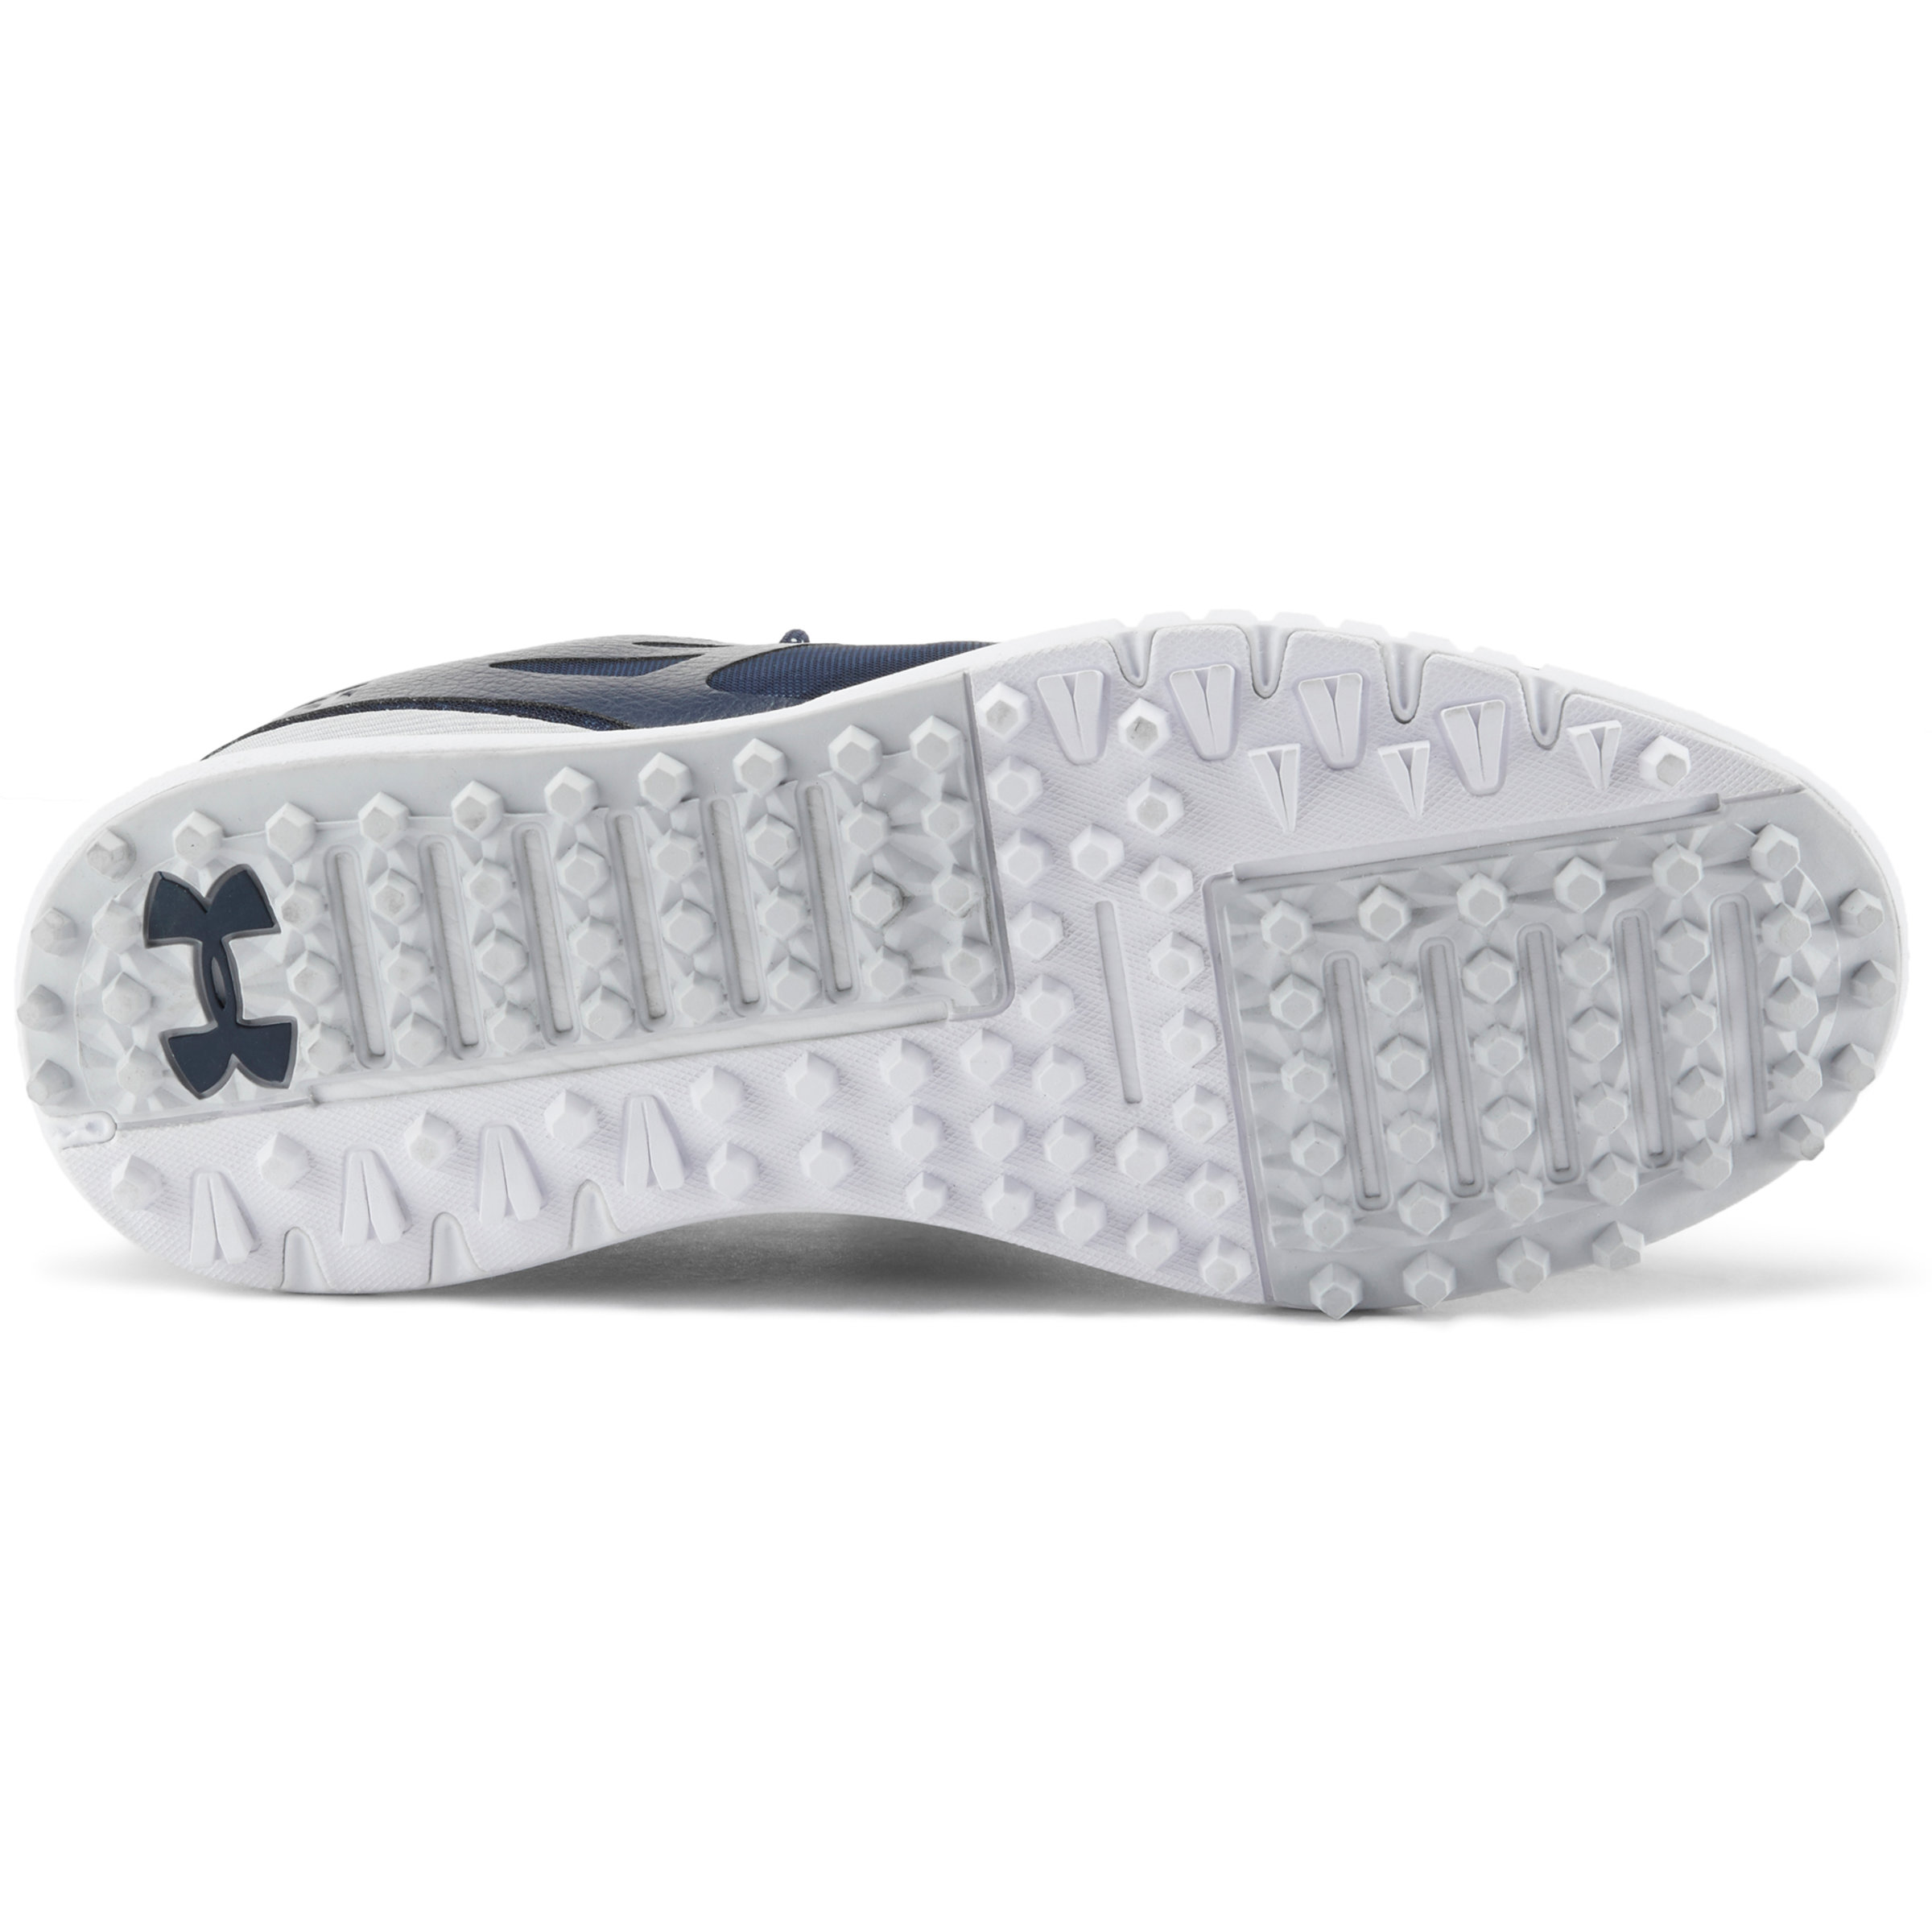 Under Armour Charged Breathe SL TE Navy Damen